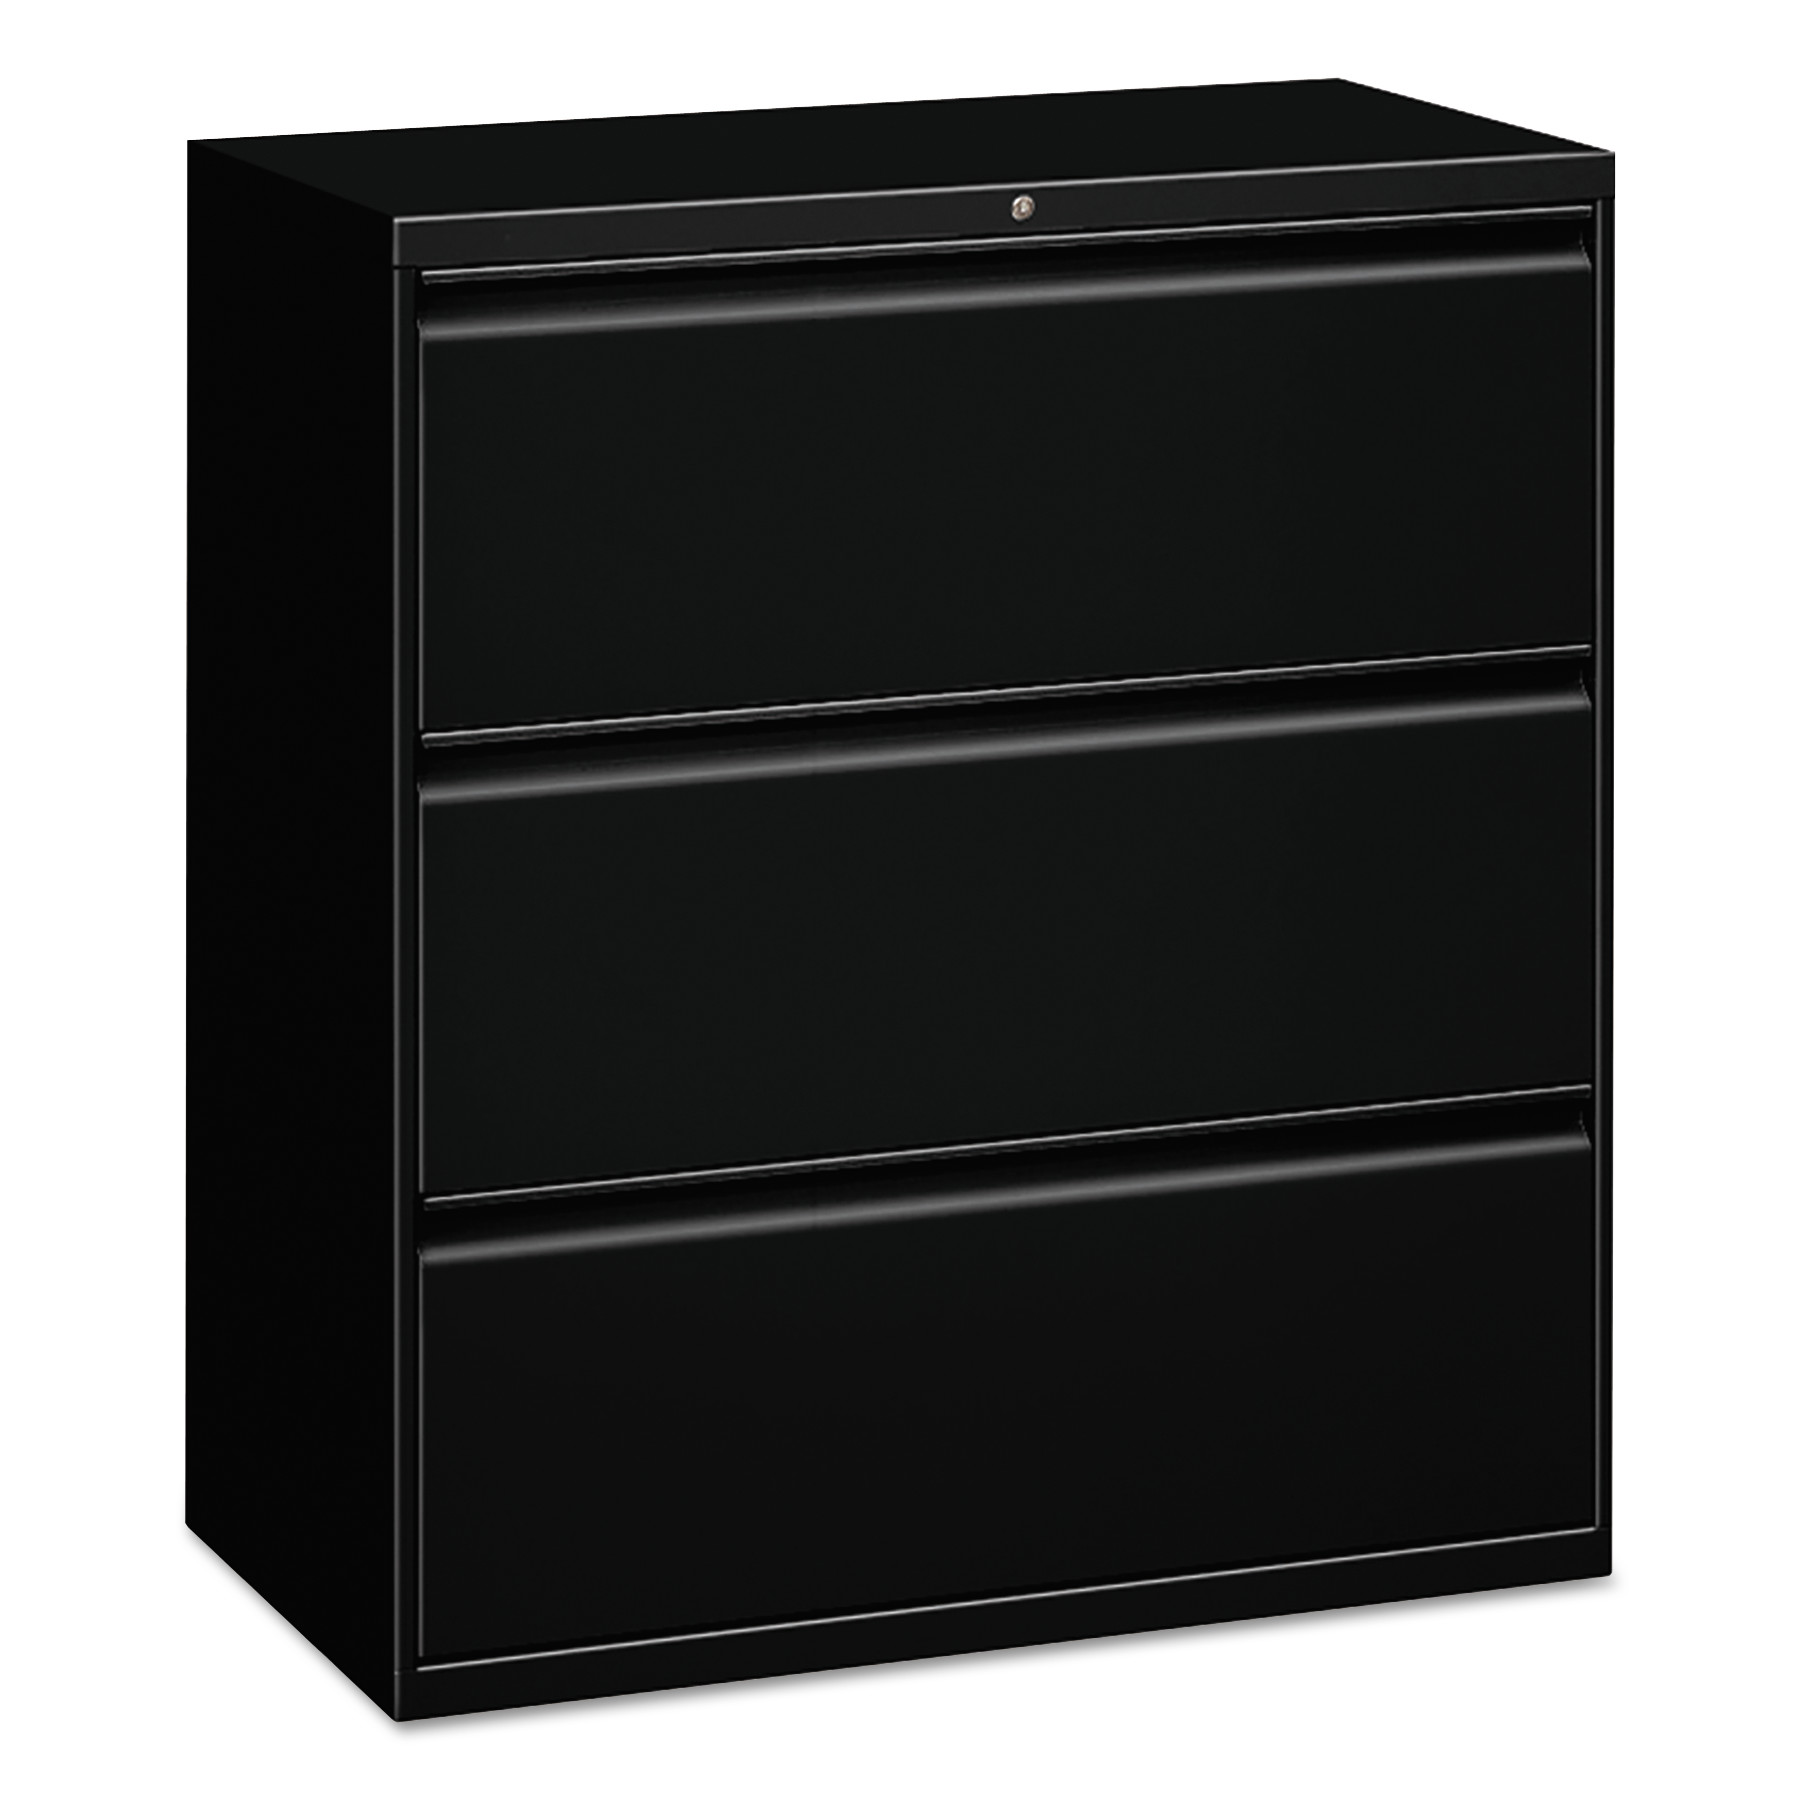 Three-Drawer Lateral File Cabinet, 30w x 18d x 39 1/2h, Black